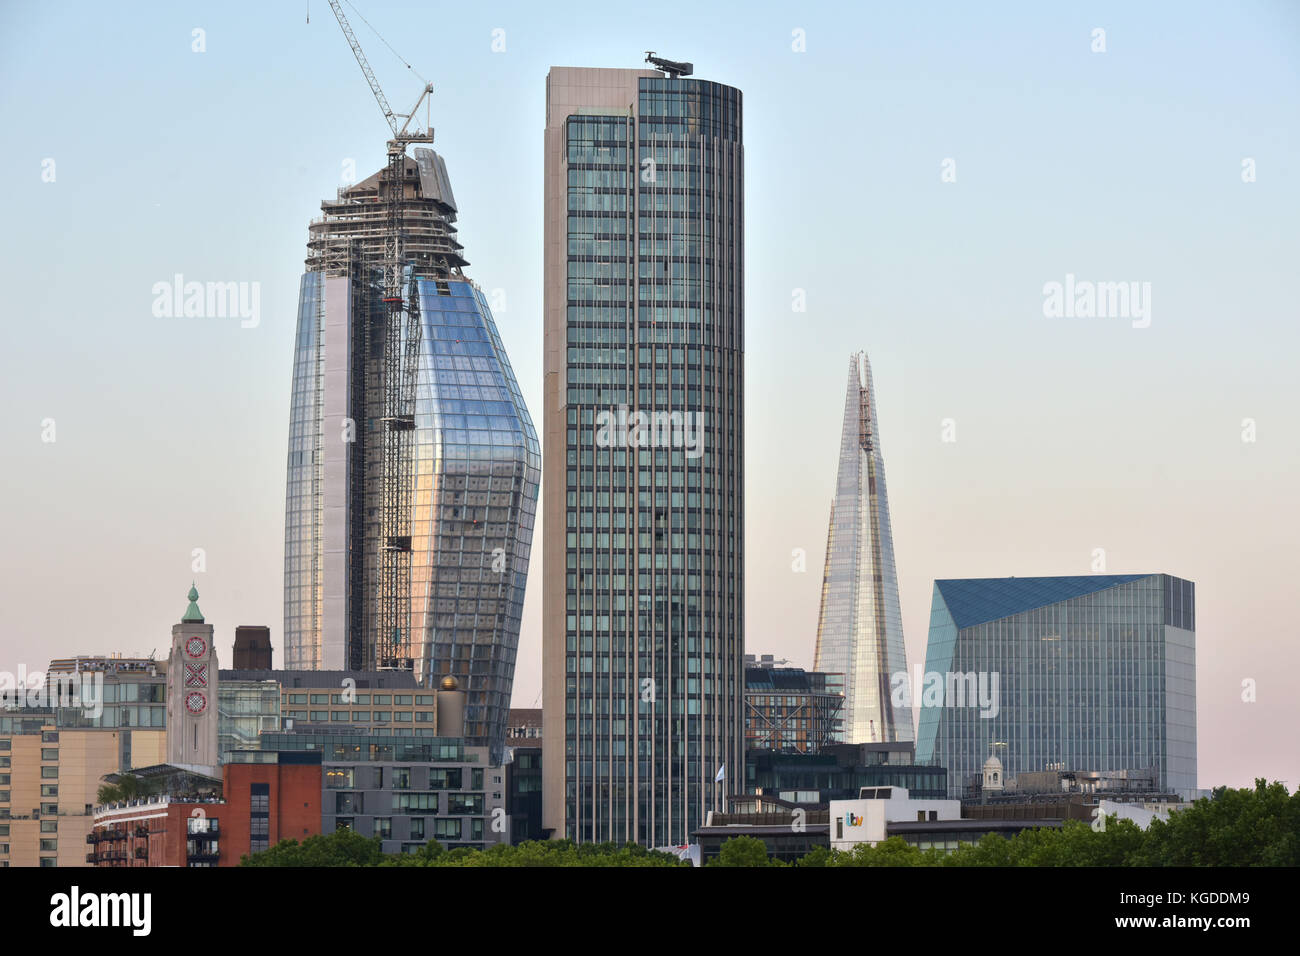 New developments along the South Bank of the River Thames in London are creating an alternative London skyline. Left to right, the diminutive OXO Towe Stock Photo